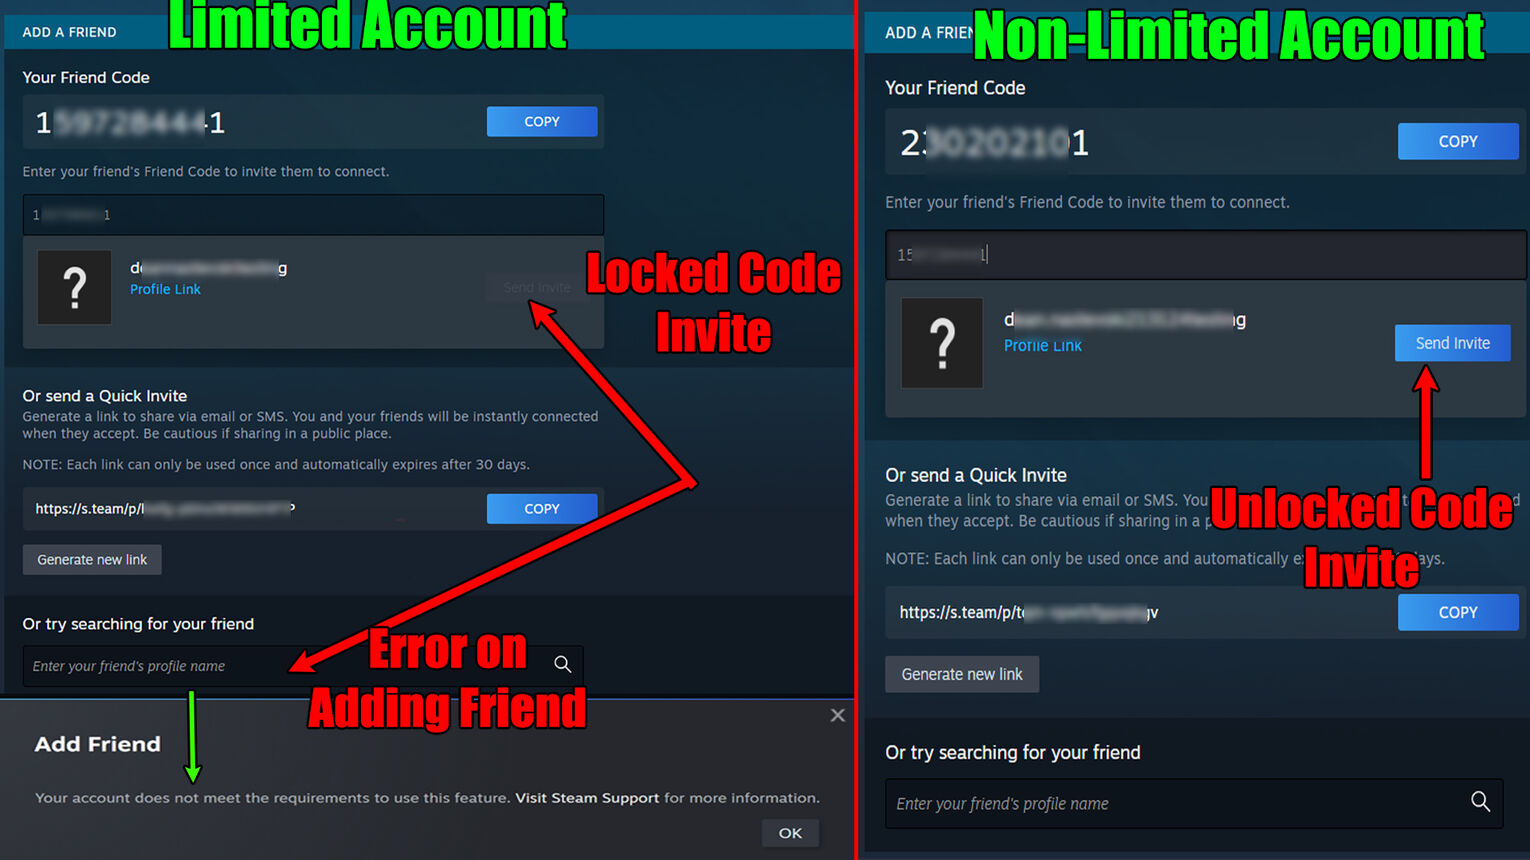 Steam Friend Requests on Limited and Non-Limited Accounts